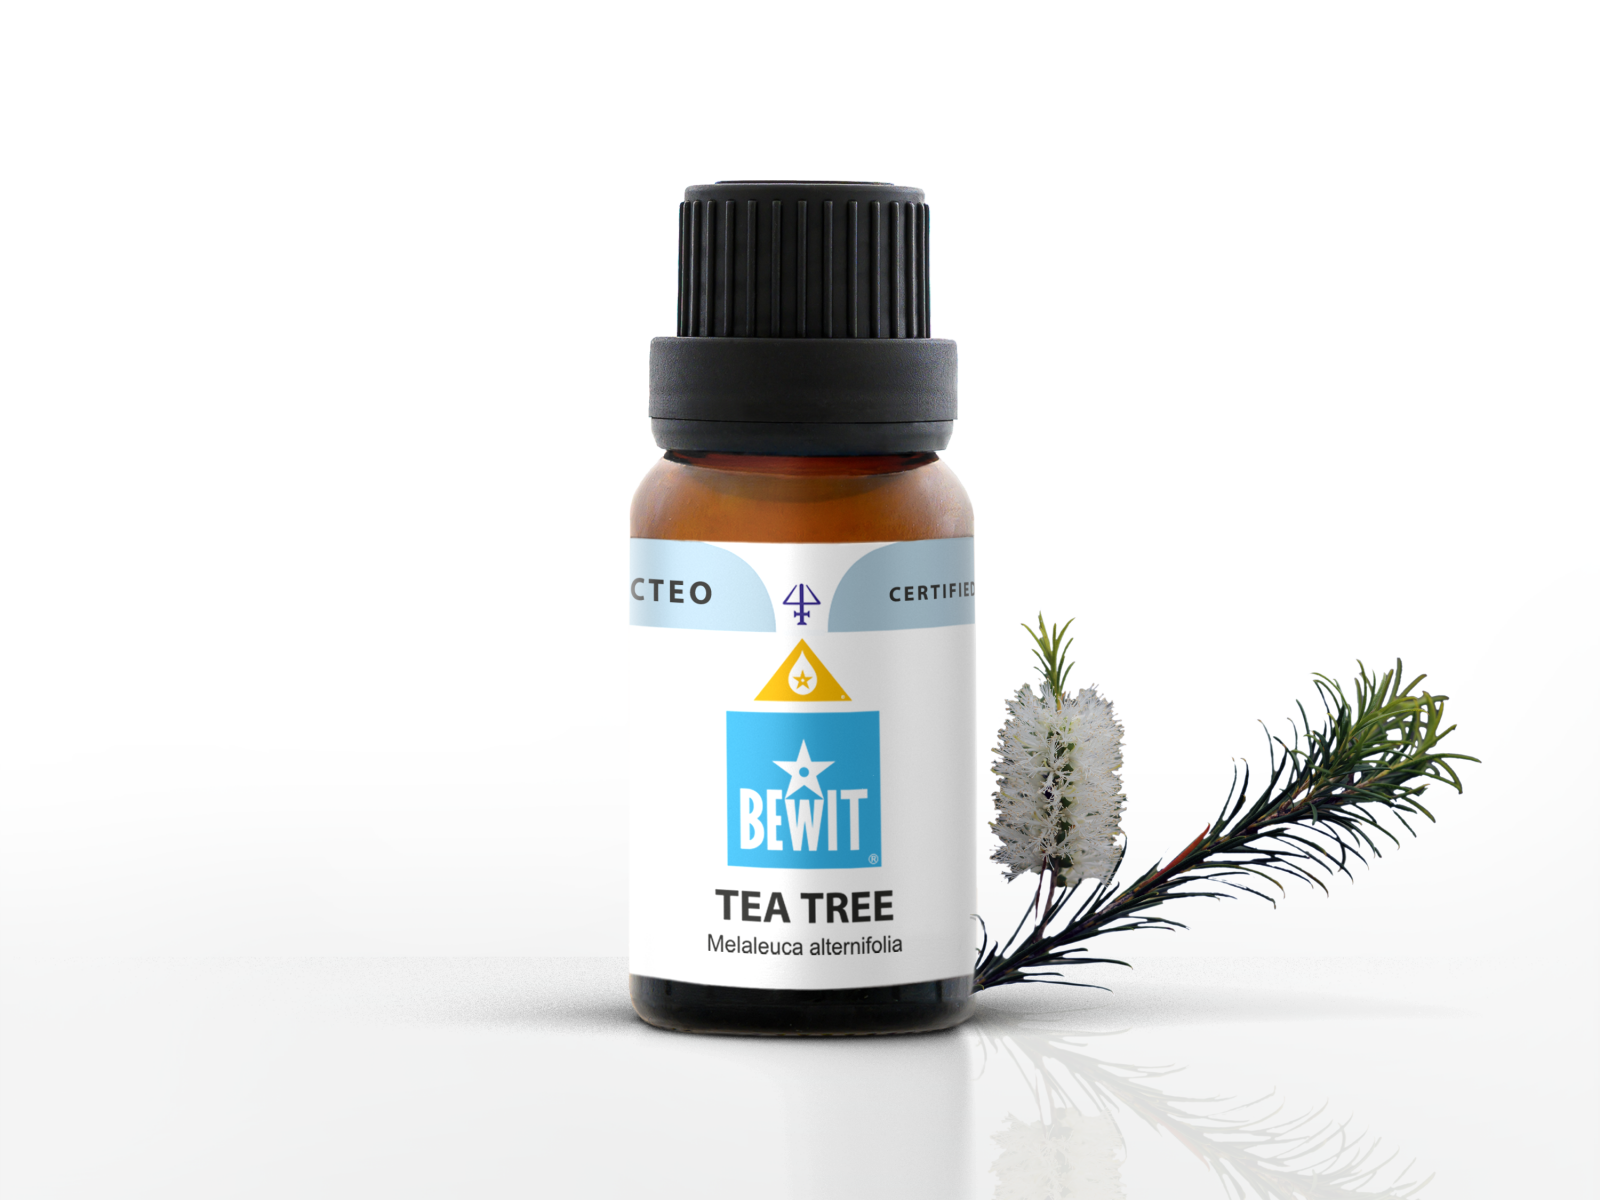 Tea tree - It is a 100% pure essential oil - 1